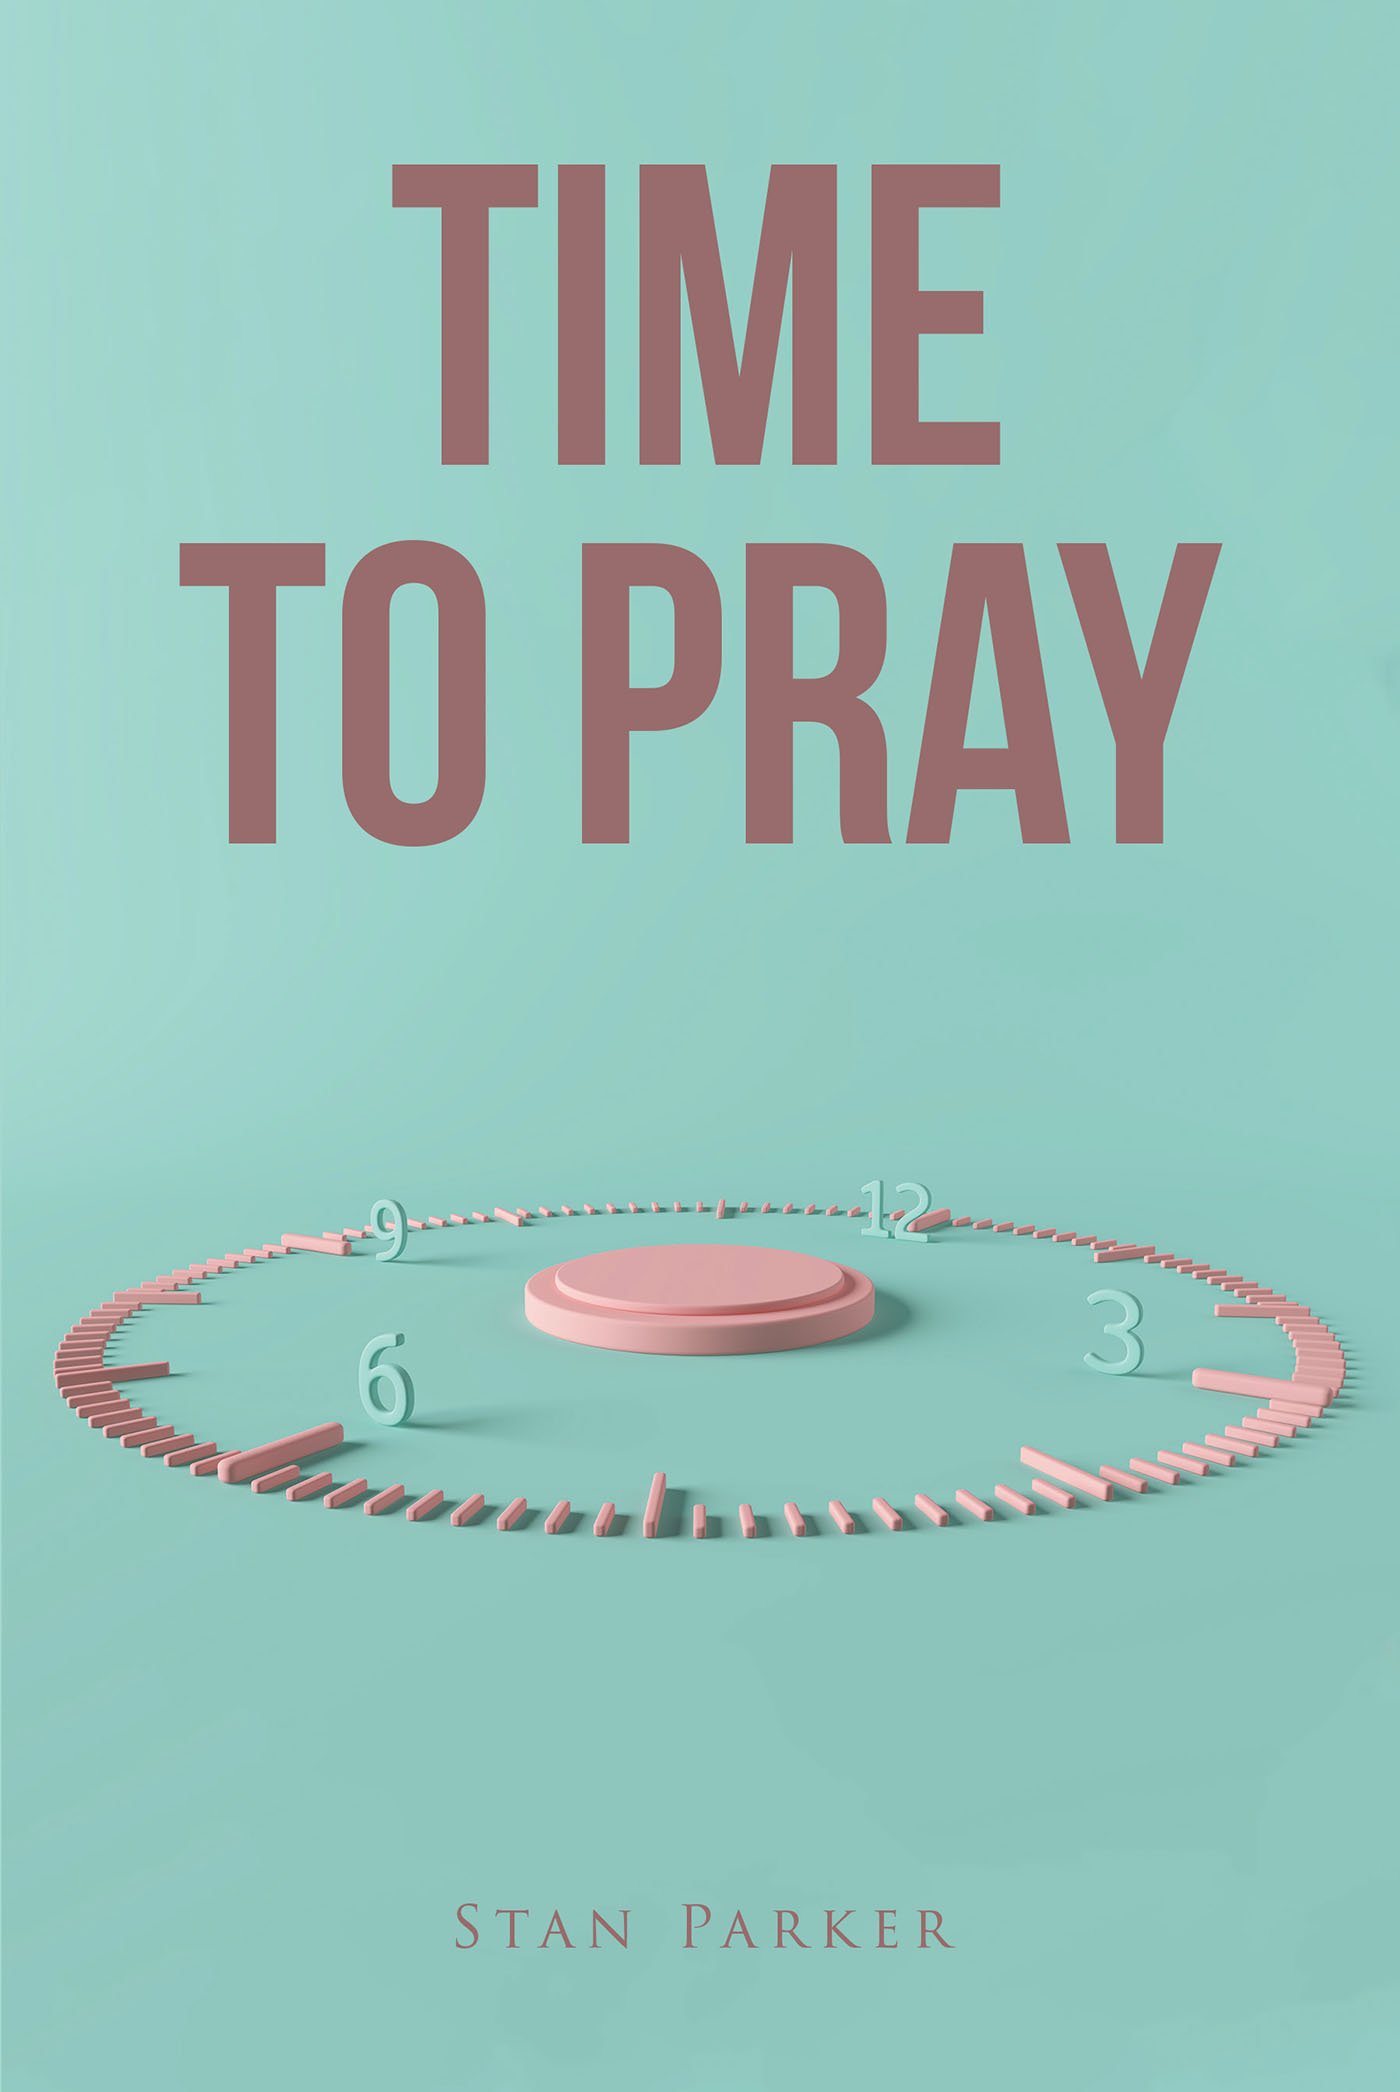 Stan Parker’s Newly Released "Time to Pray" is an Informative Look Into the Key Components Necessary to a Fulfilling Prayer Life